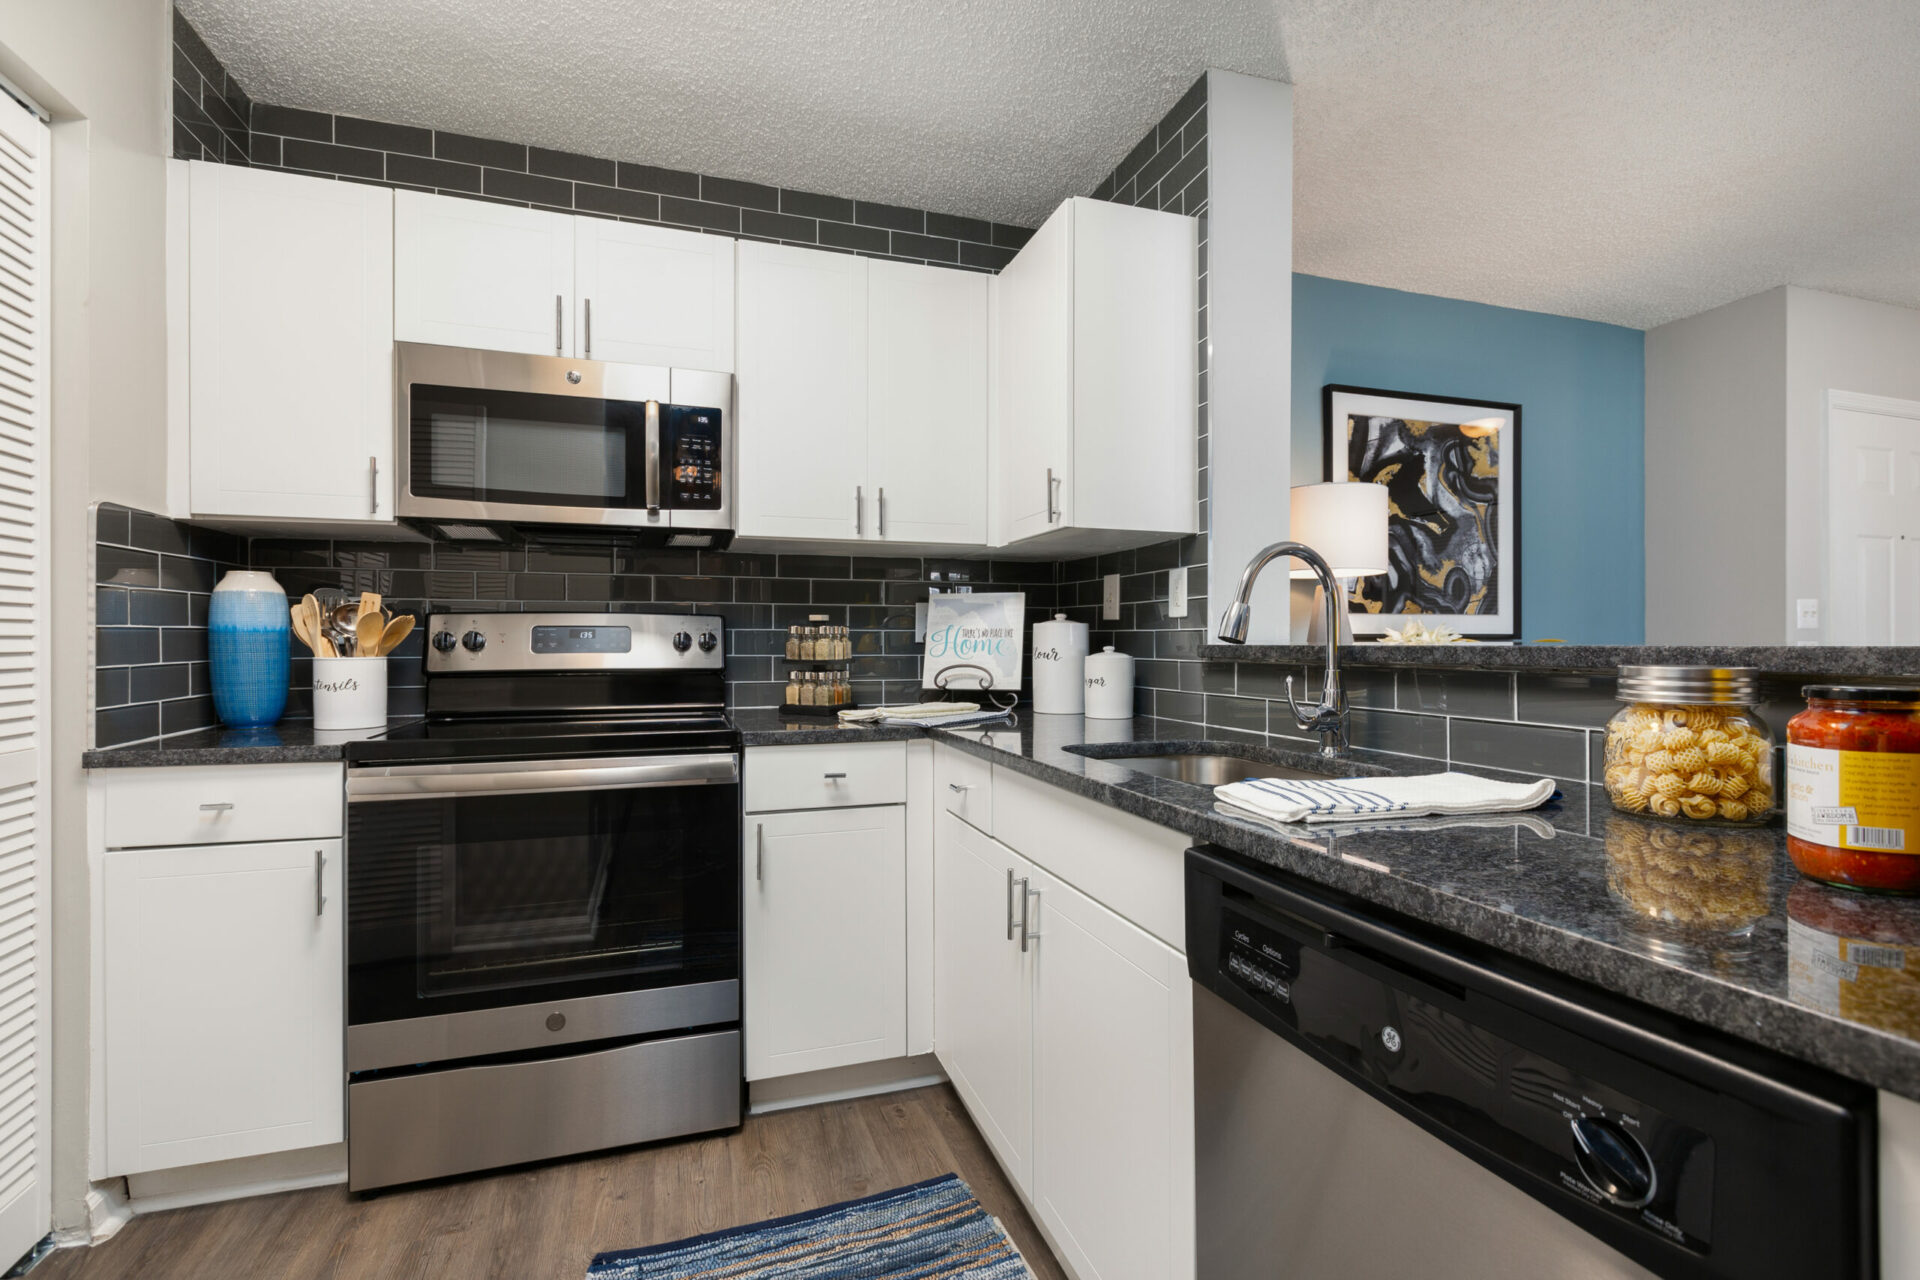 Kitchen with stainless steel appliances and white cabinets in an apartment at Beach Walk at Sheridan.